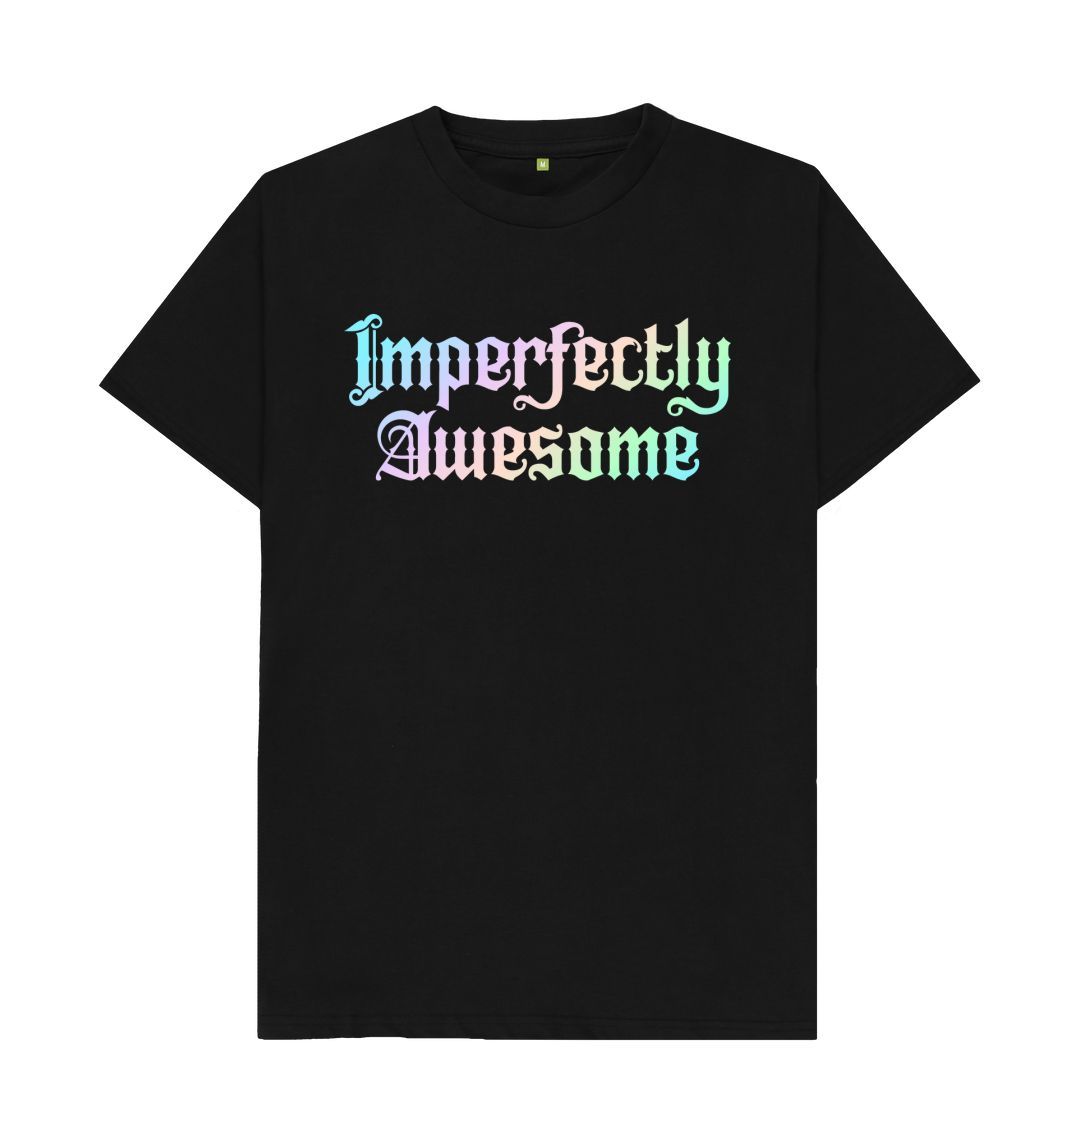 Black Imperfectly Awesome Tee